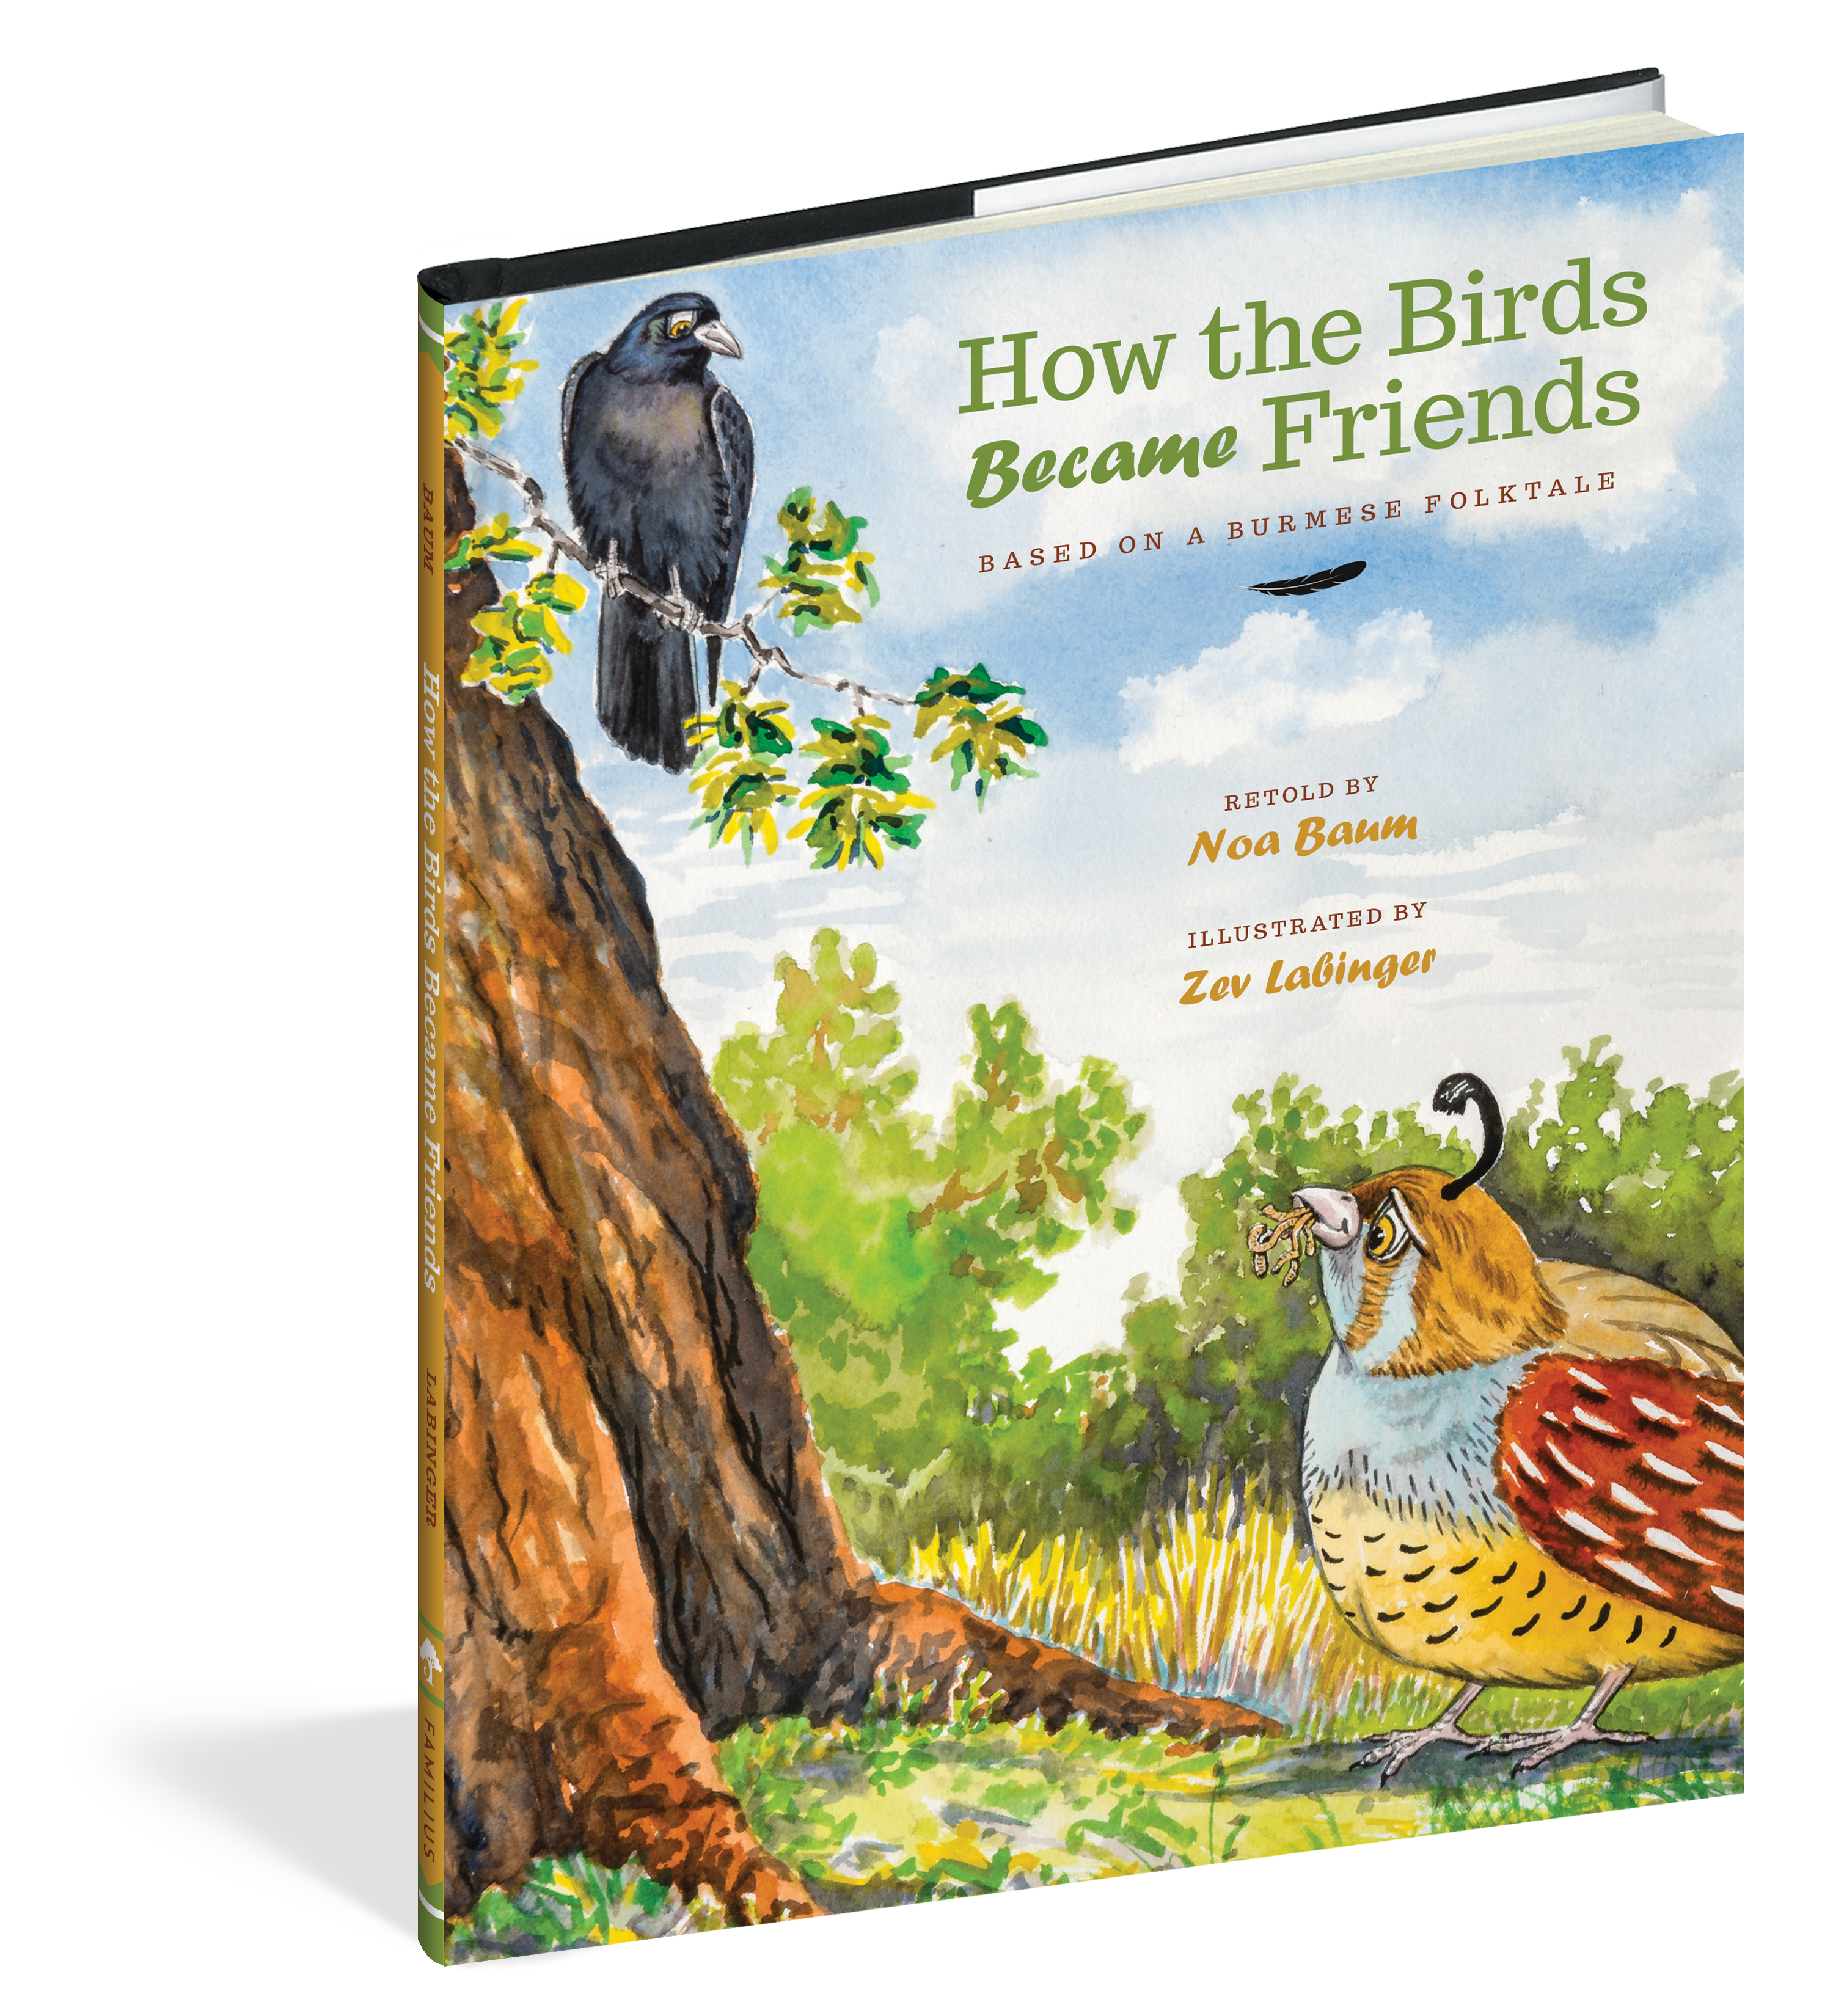 The cover of the picture book How the Birds Became Friends.